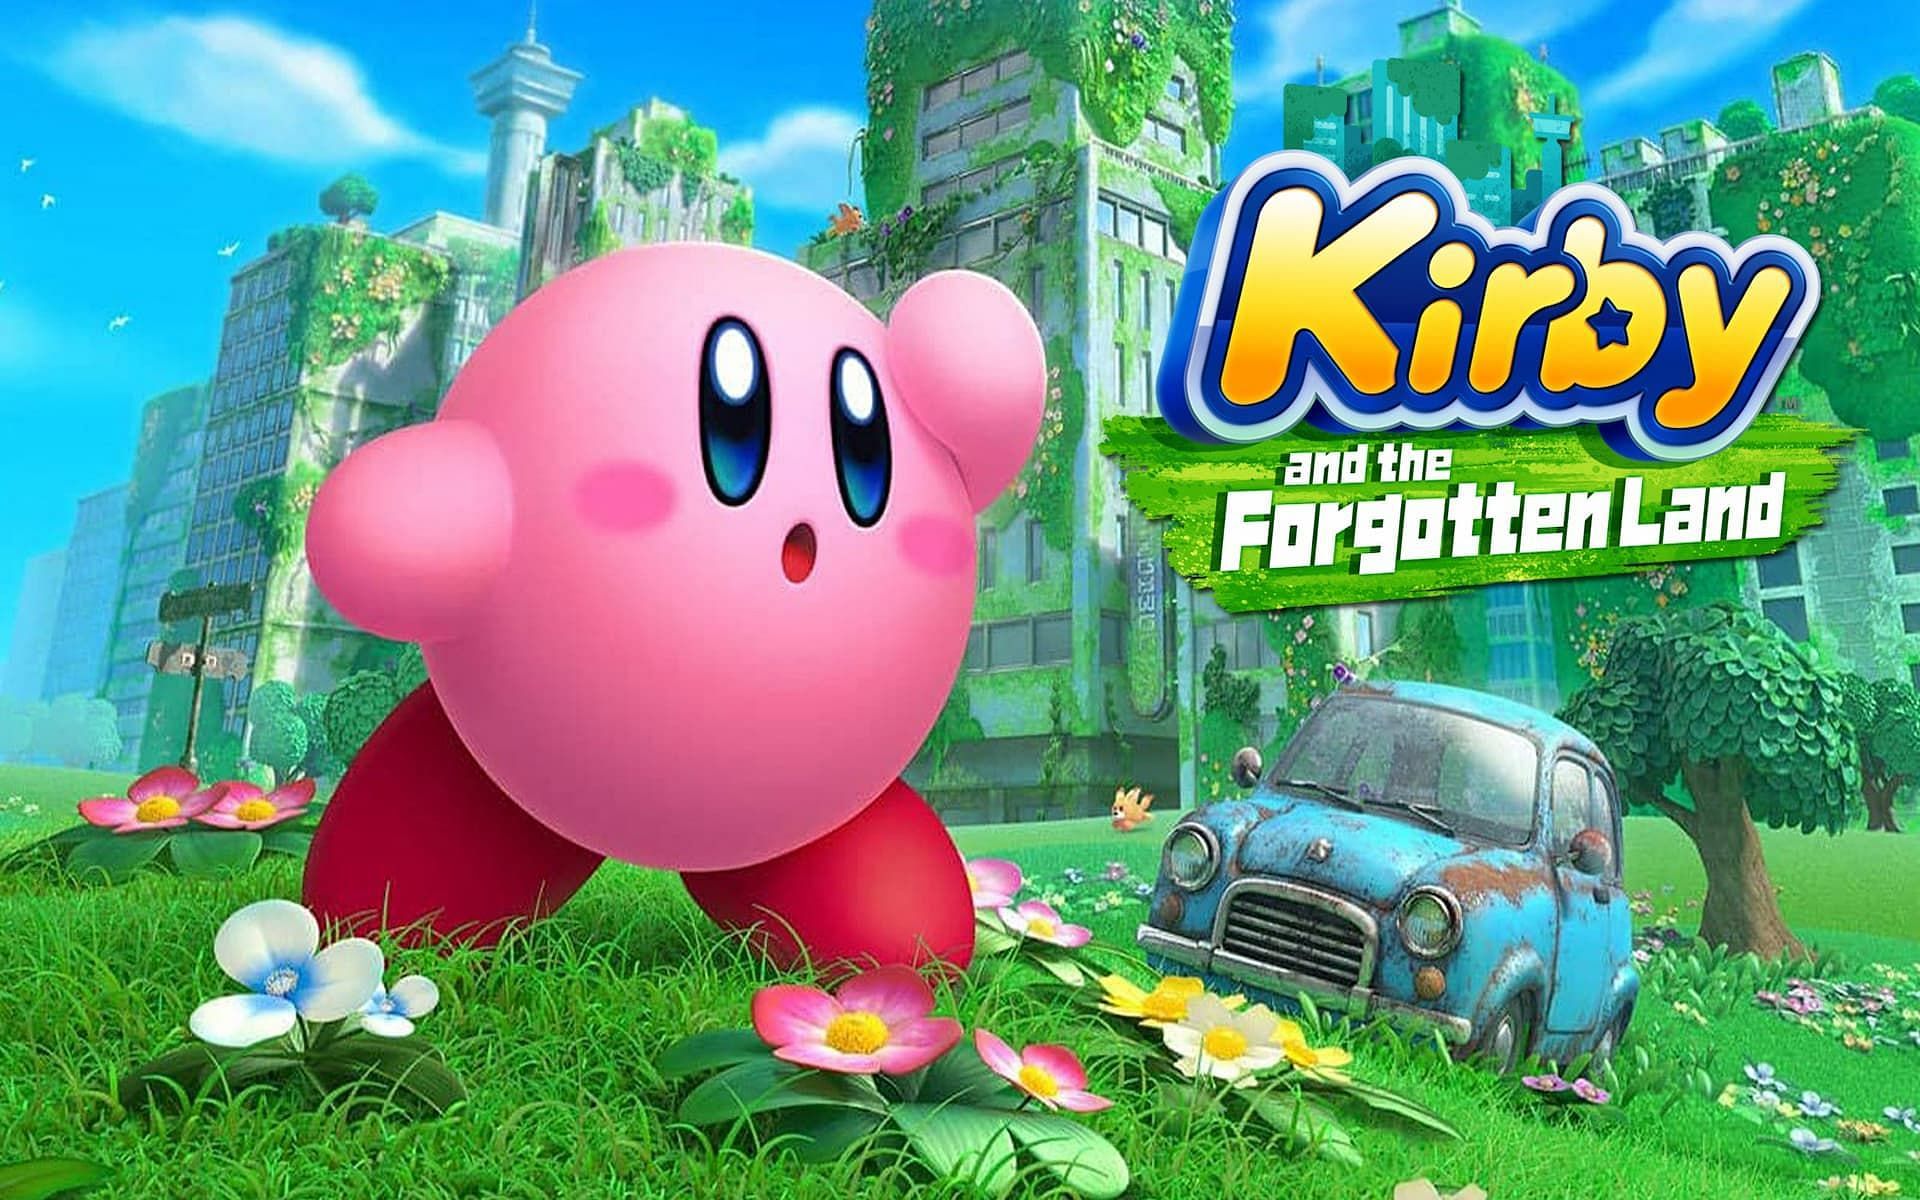 A promotional image for the new Kirby game (Image via Nintendo)